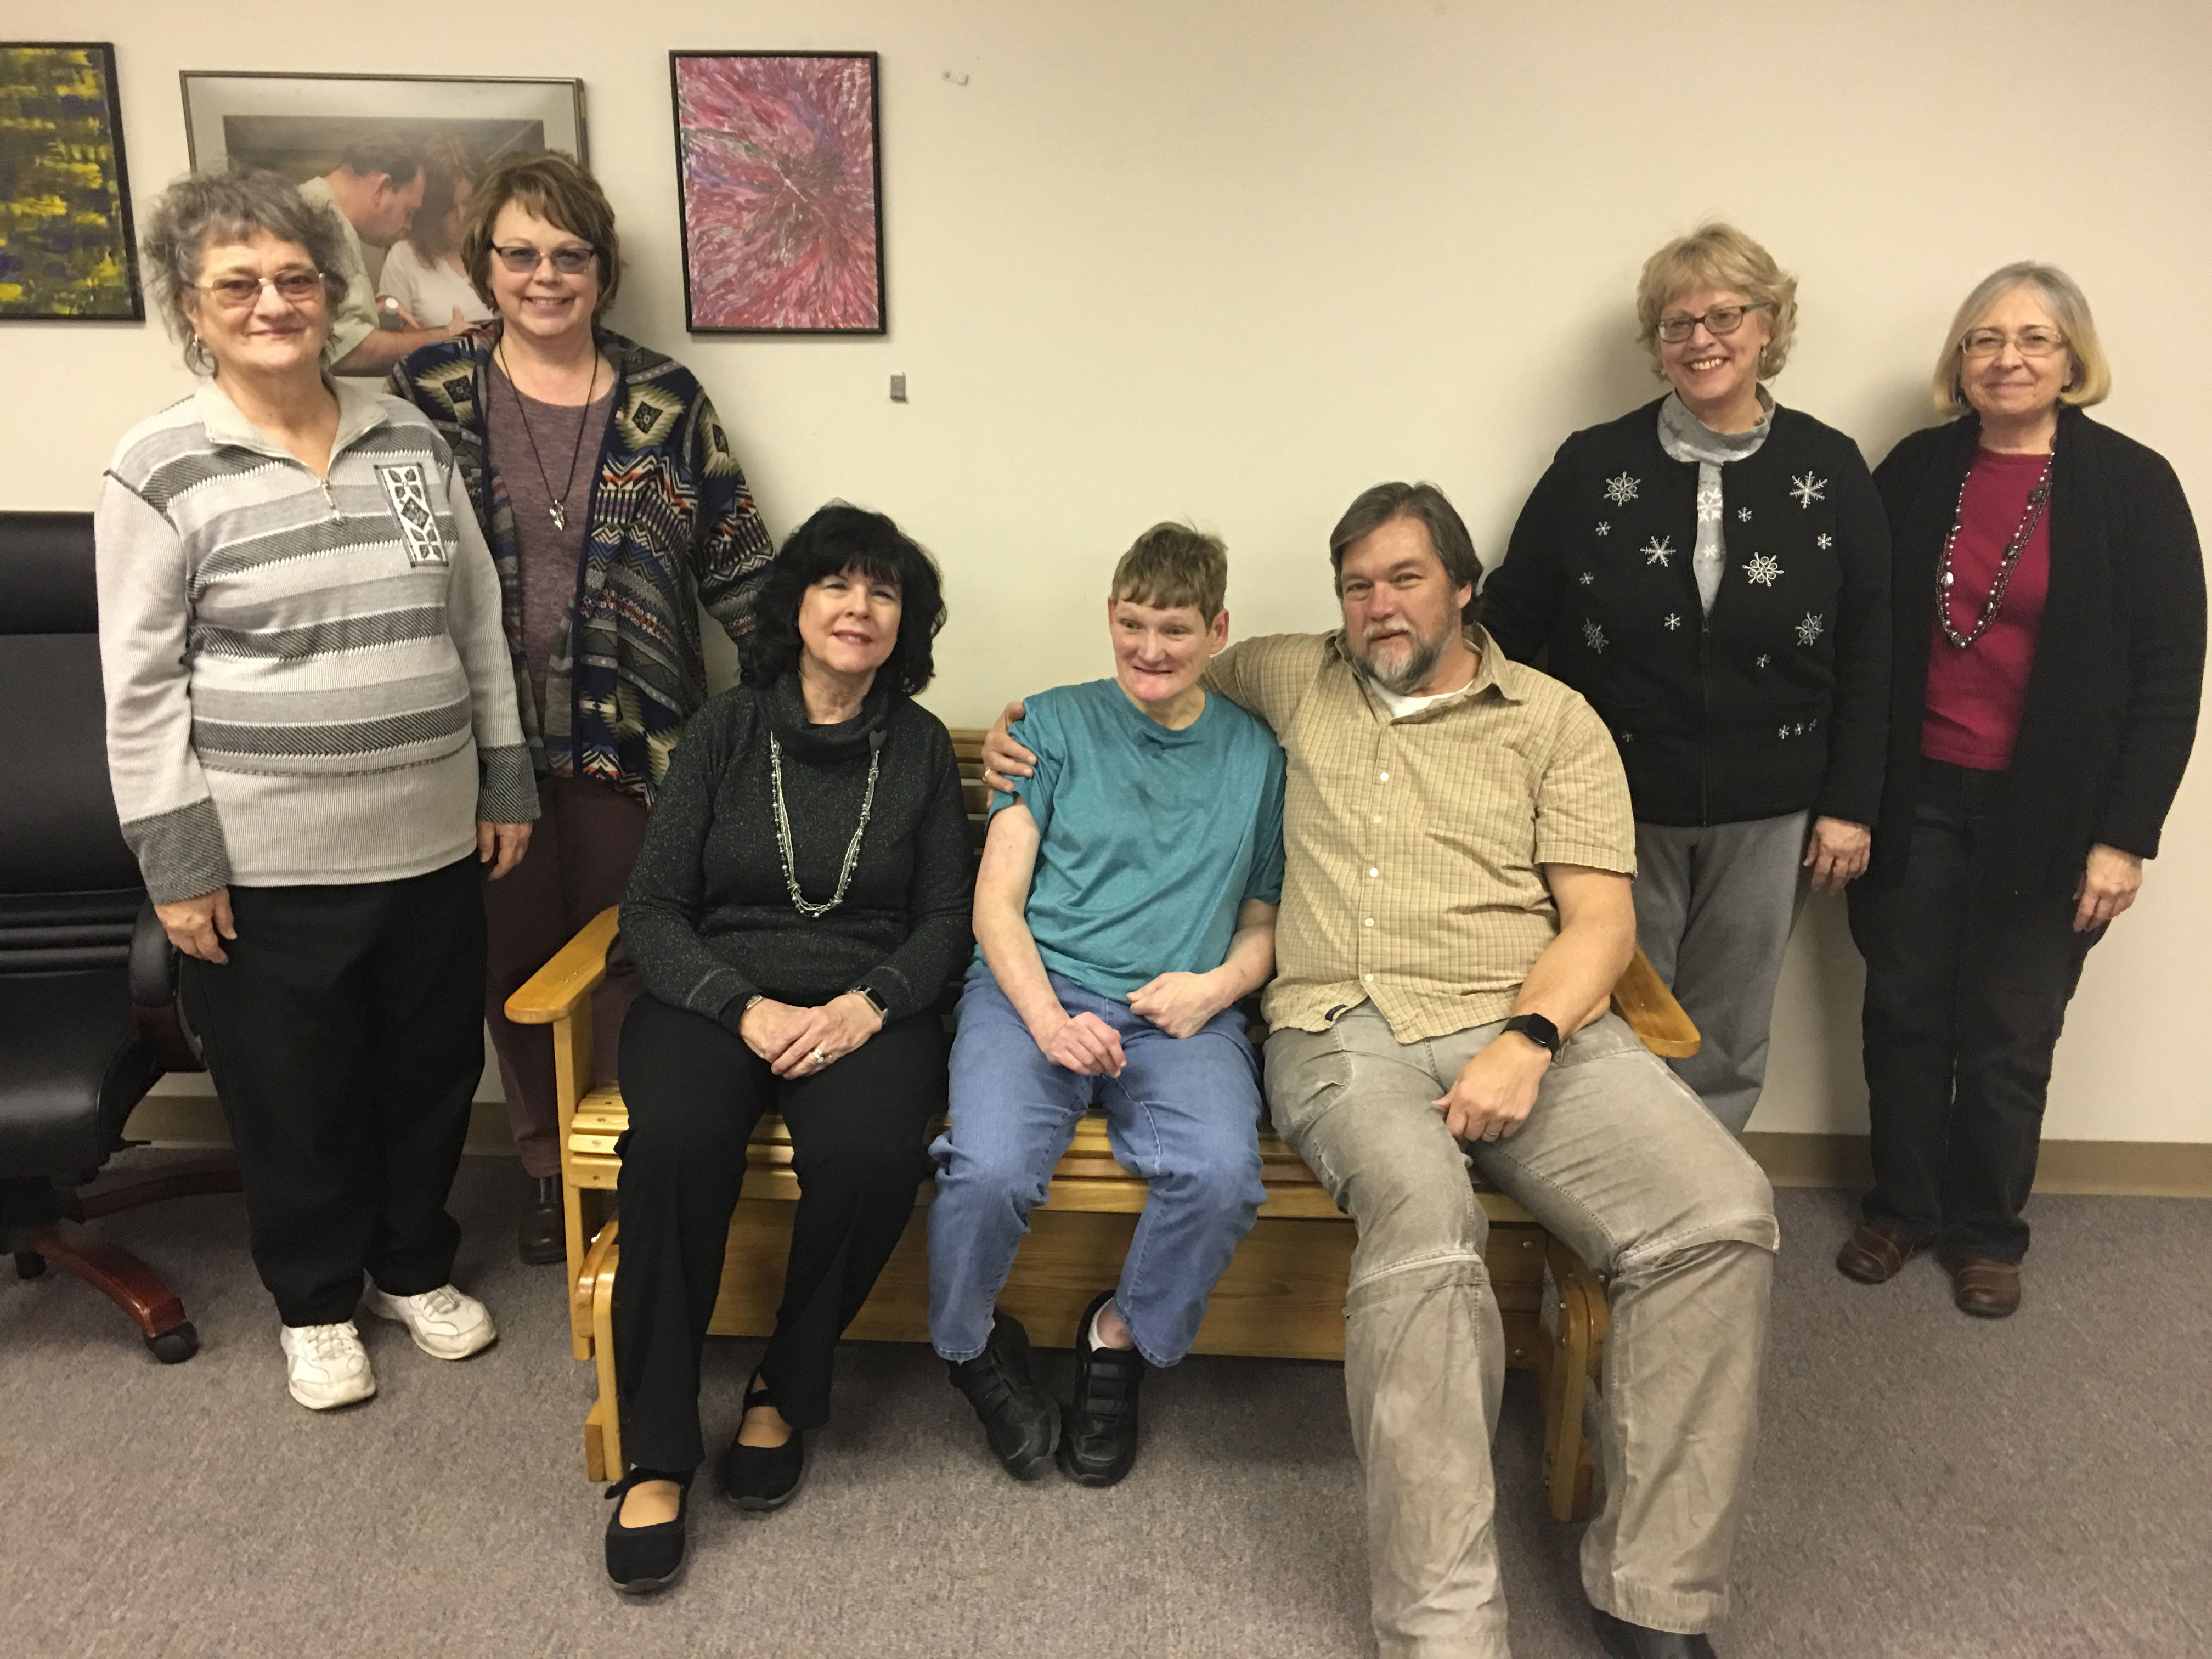 Members of the Ohio Coalition for the Education of Children with Disabilities (OCECD)